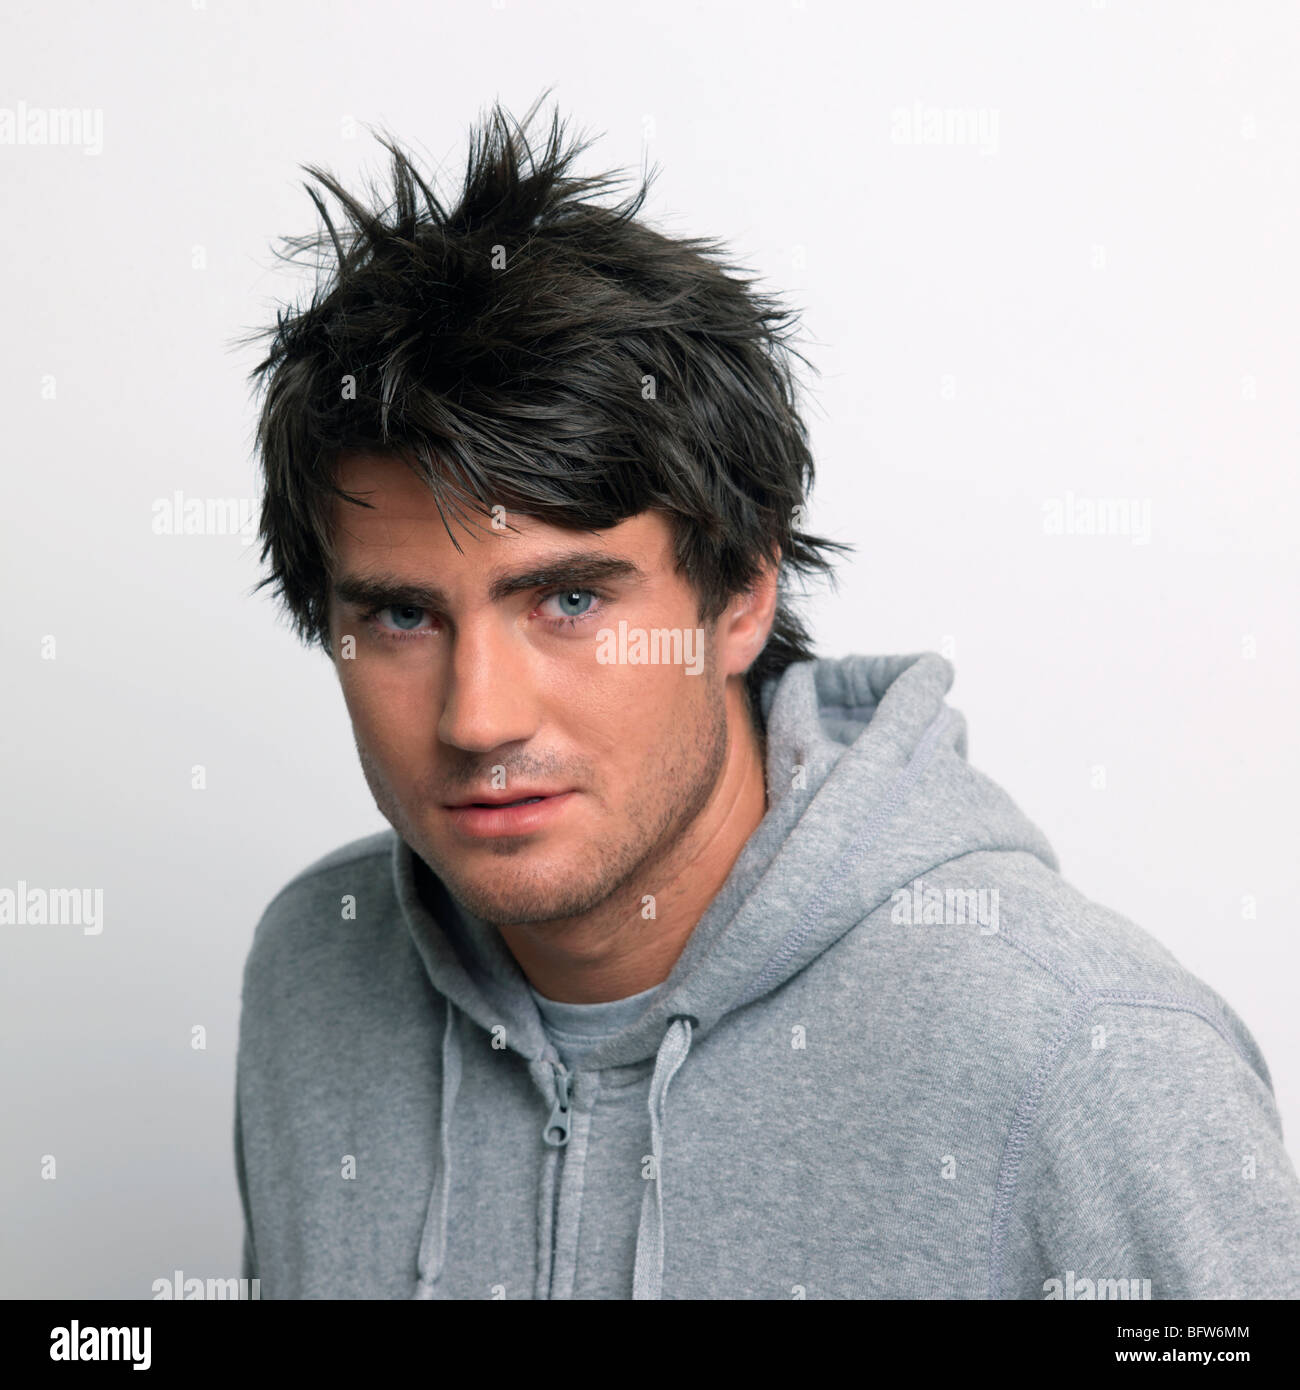 Young man in grey hooded top Stock Photo